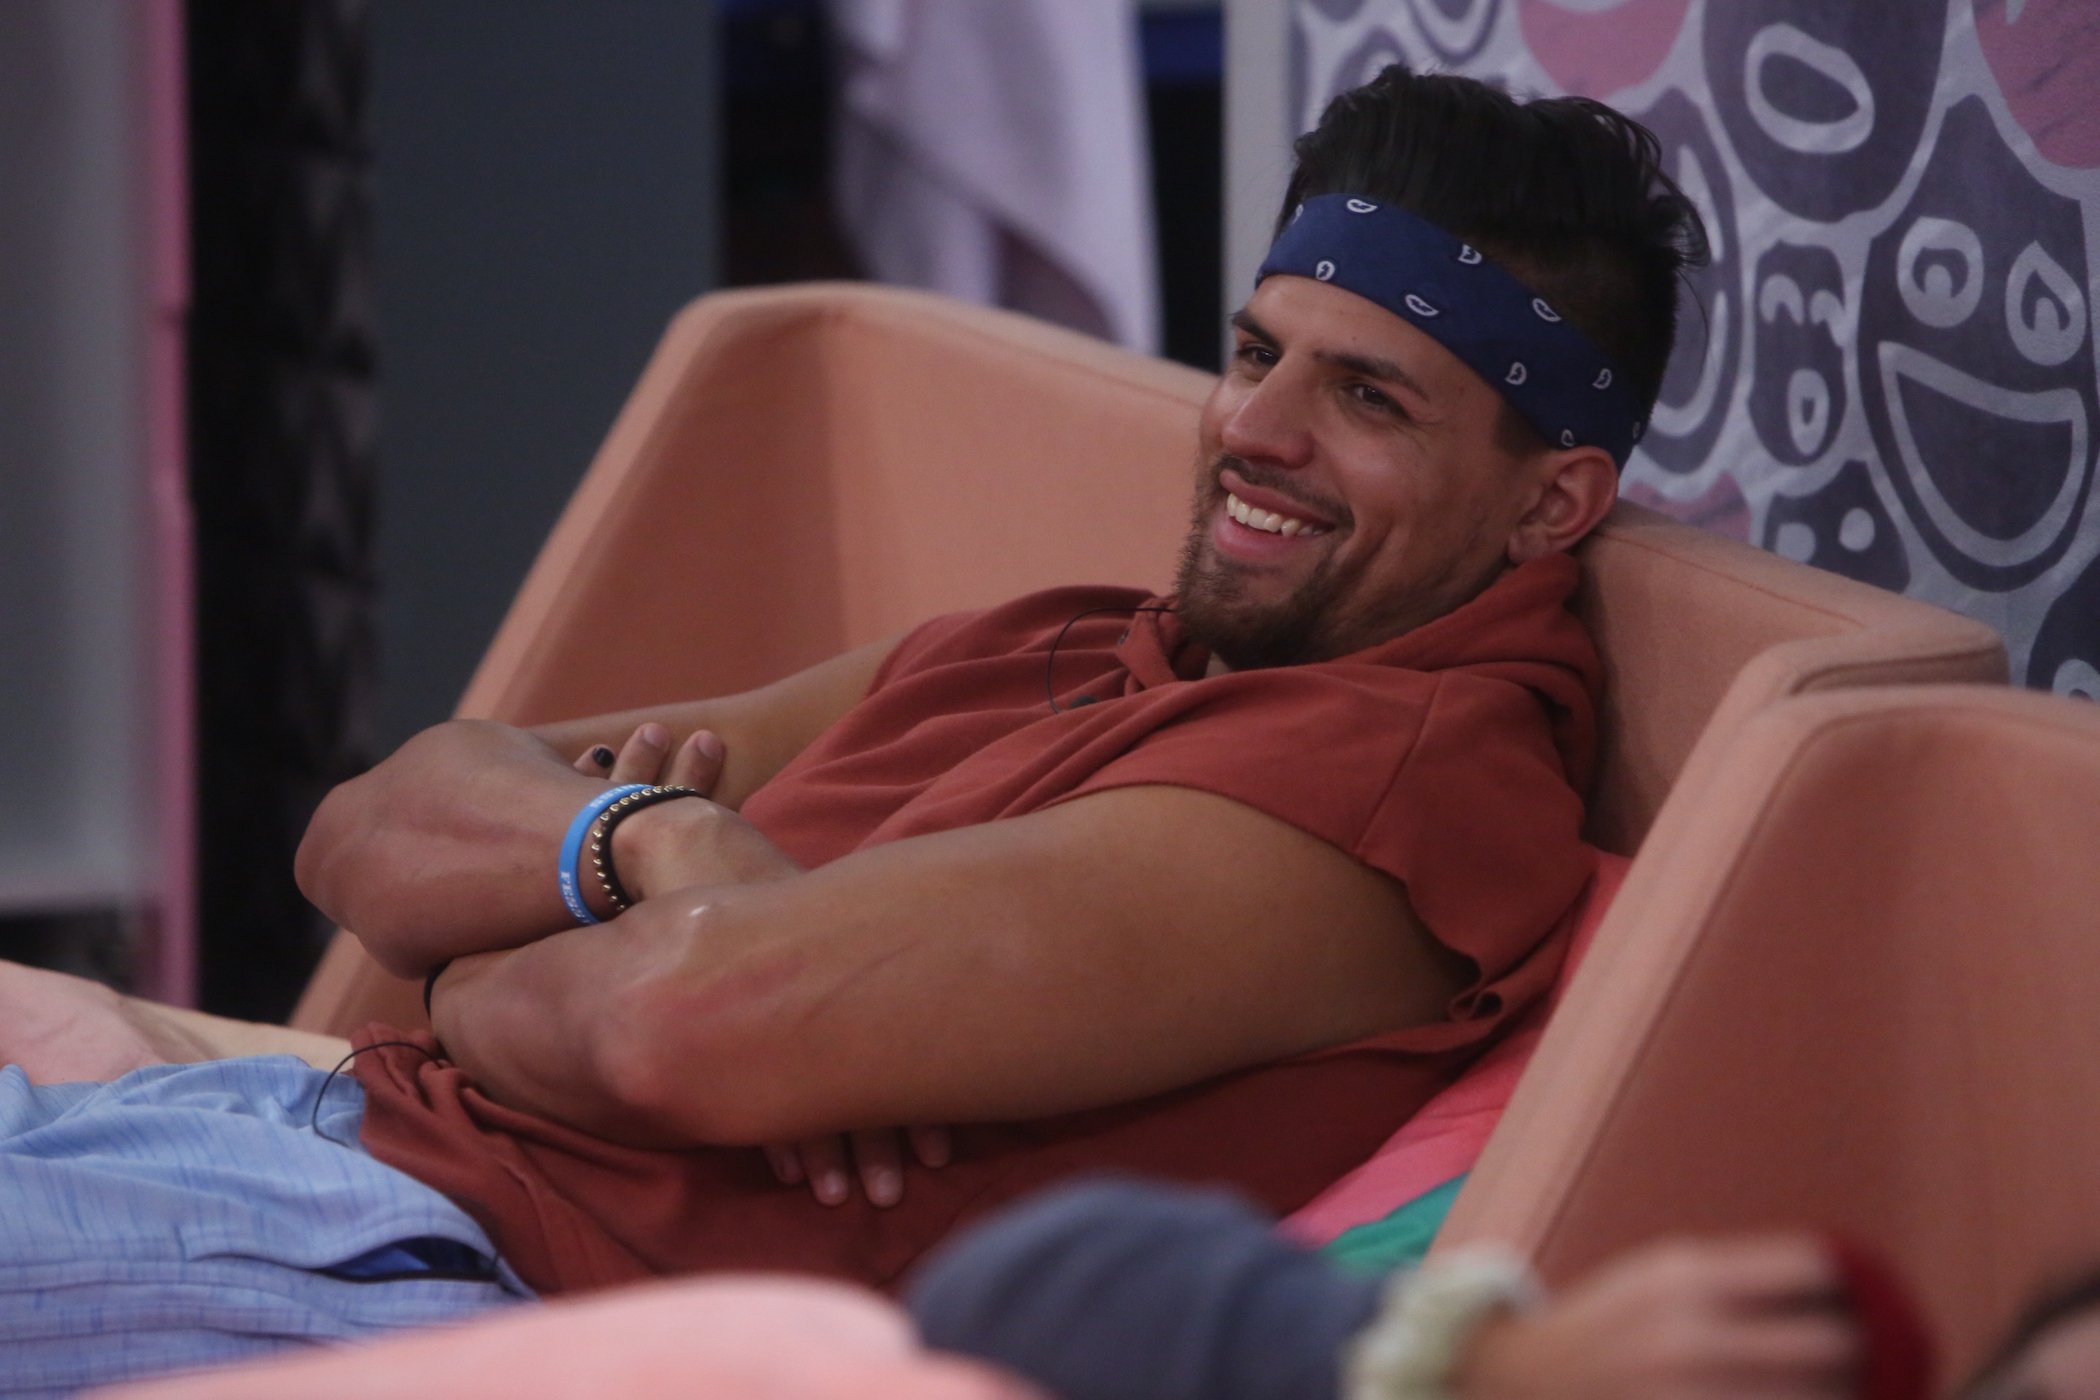 Fessy Shafaat, part of MTV's 'The Challenge' Season 37 cast, laughing while sitting on a couch in the 'Big Brother' house. Fessy has a showmance with 'The Challenge's Amanda Garcia.